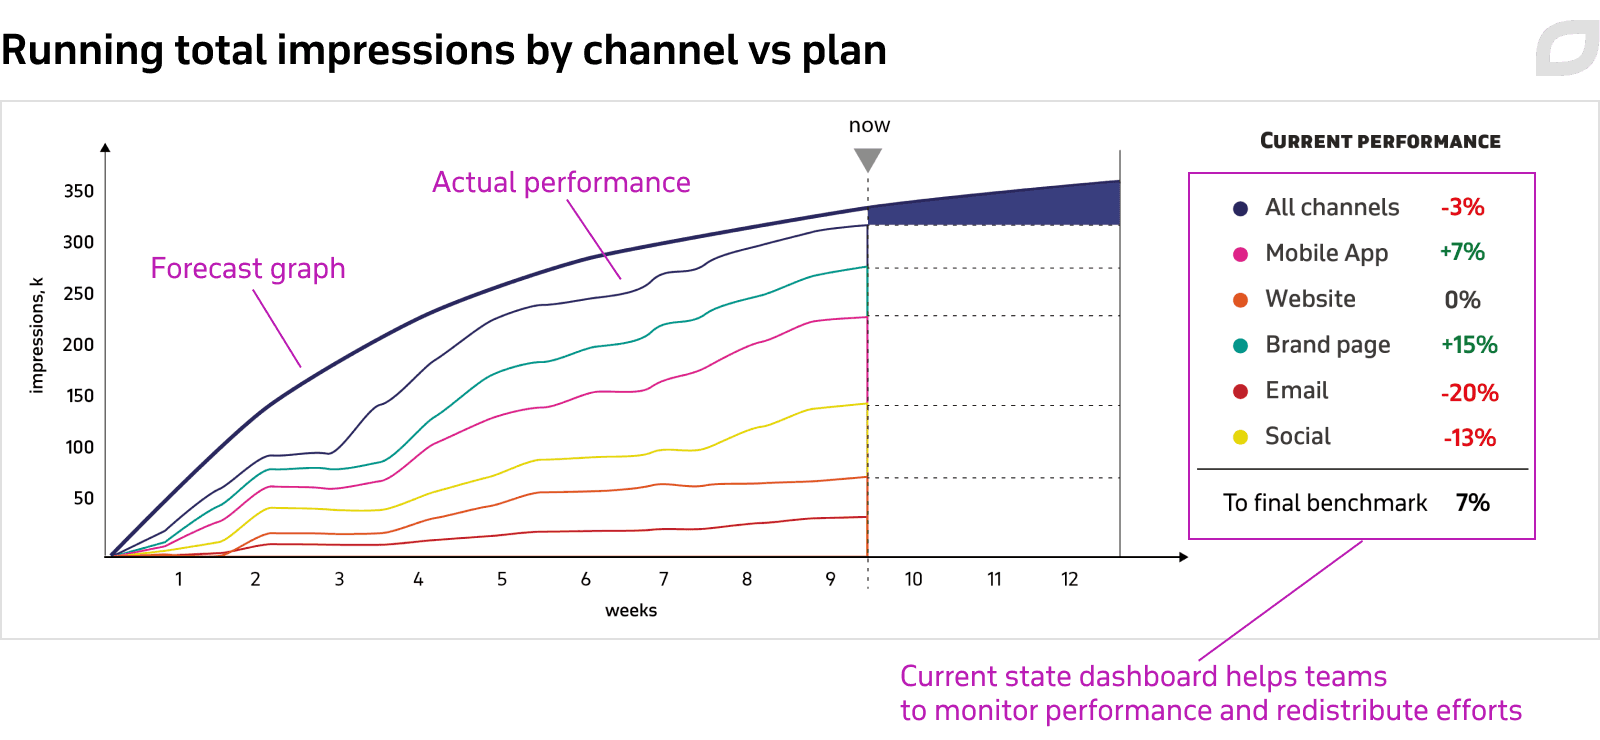 Running total impressions by channel vs plan